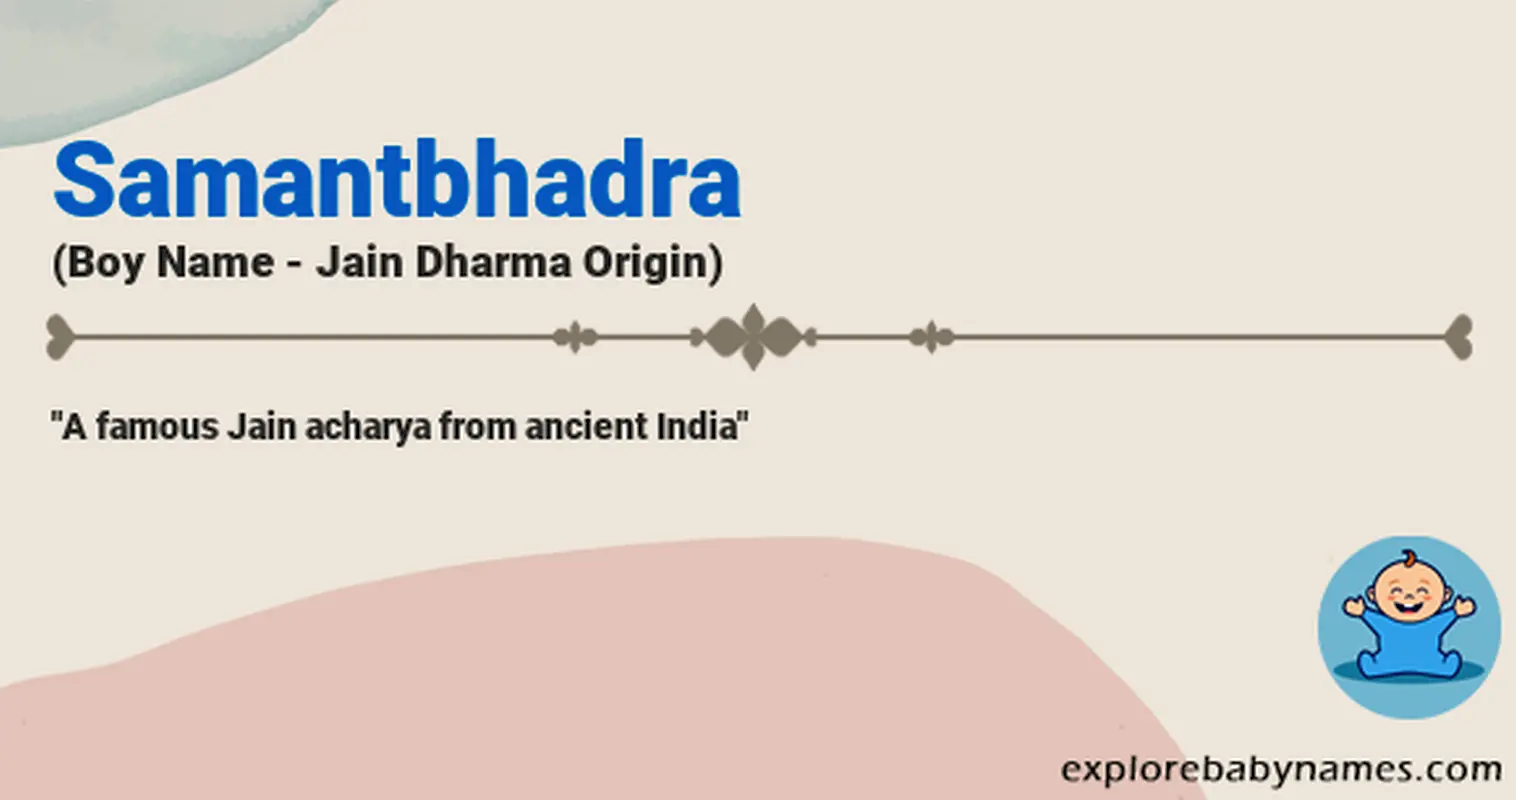 Meaning of Samantbhadra